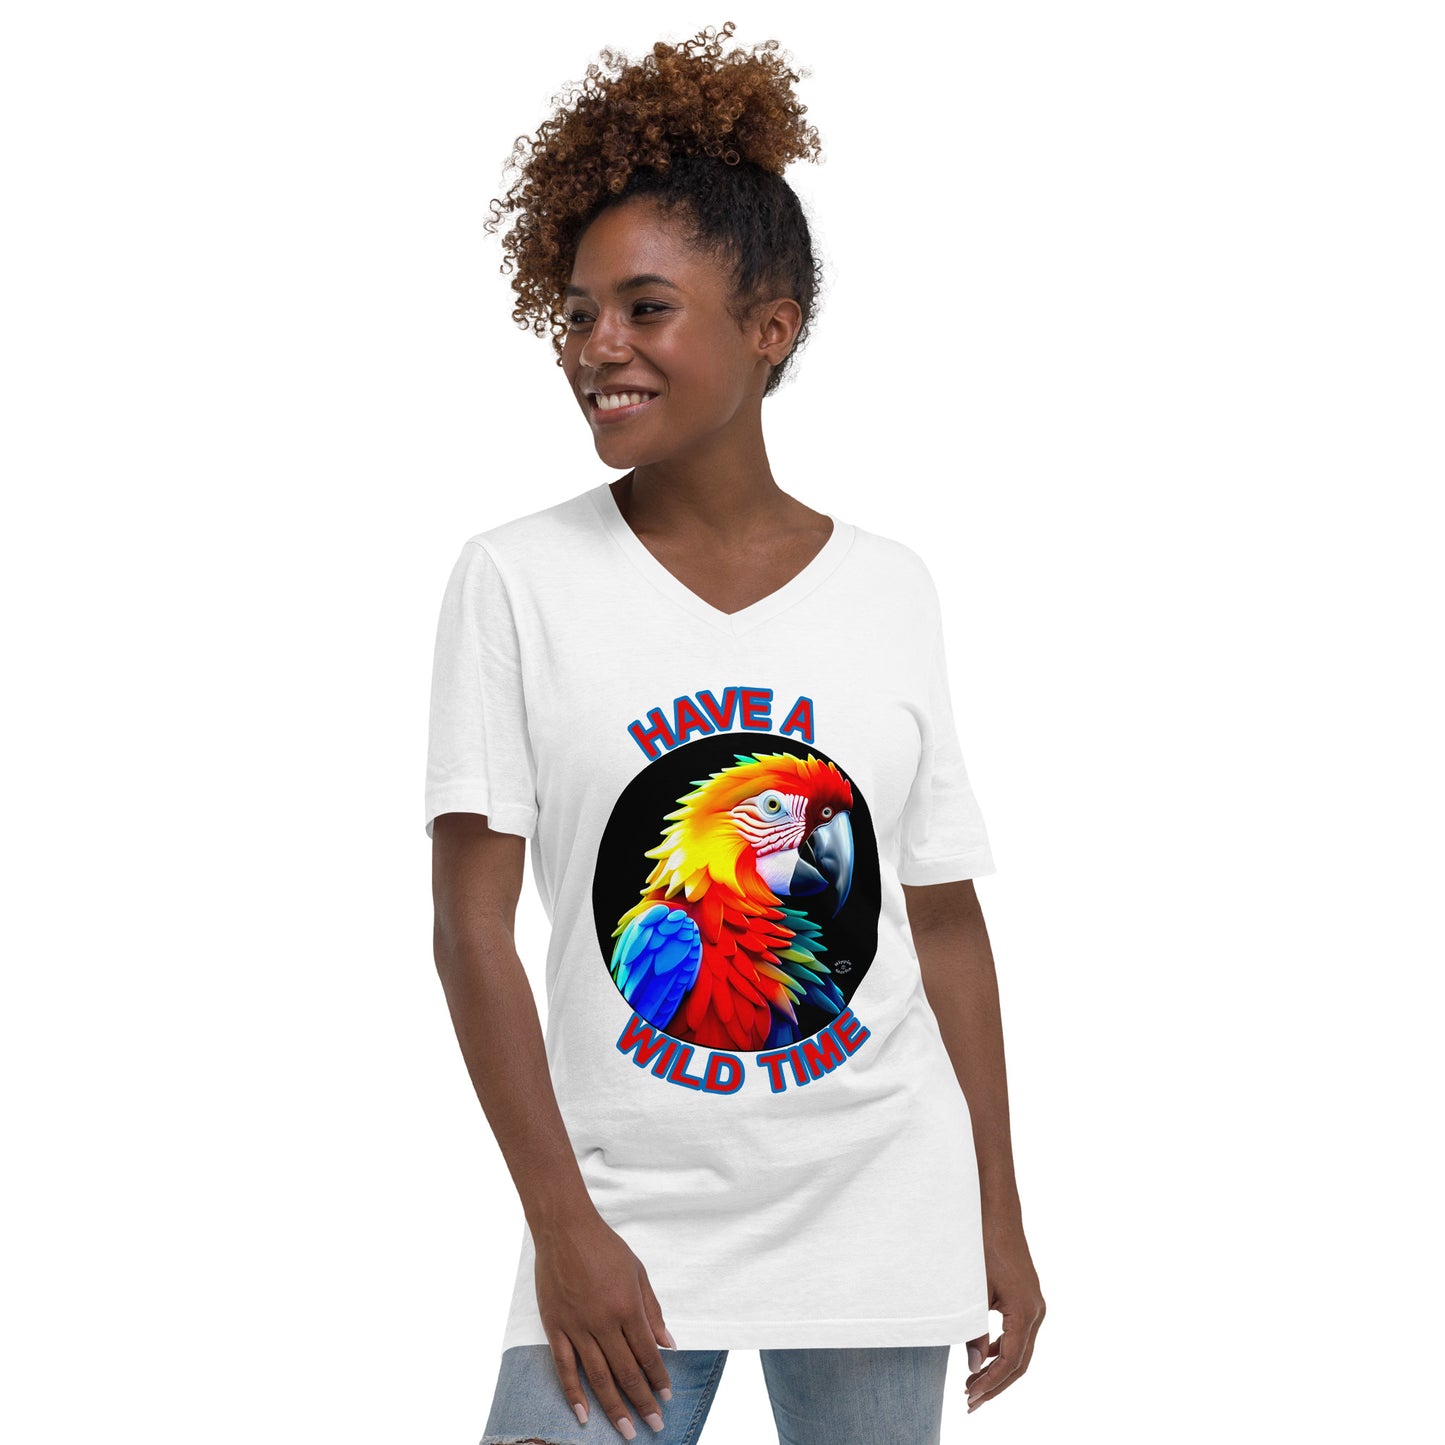 A picture of a women wearing a tshirt with the picture of a bright and colorful rainbow macaw parrot and the text HAVE A WILD TIME - white front